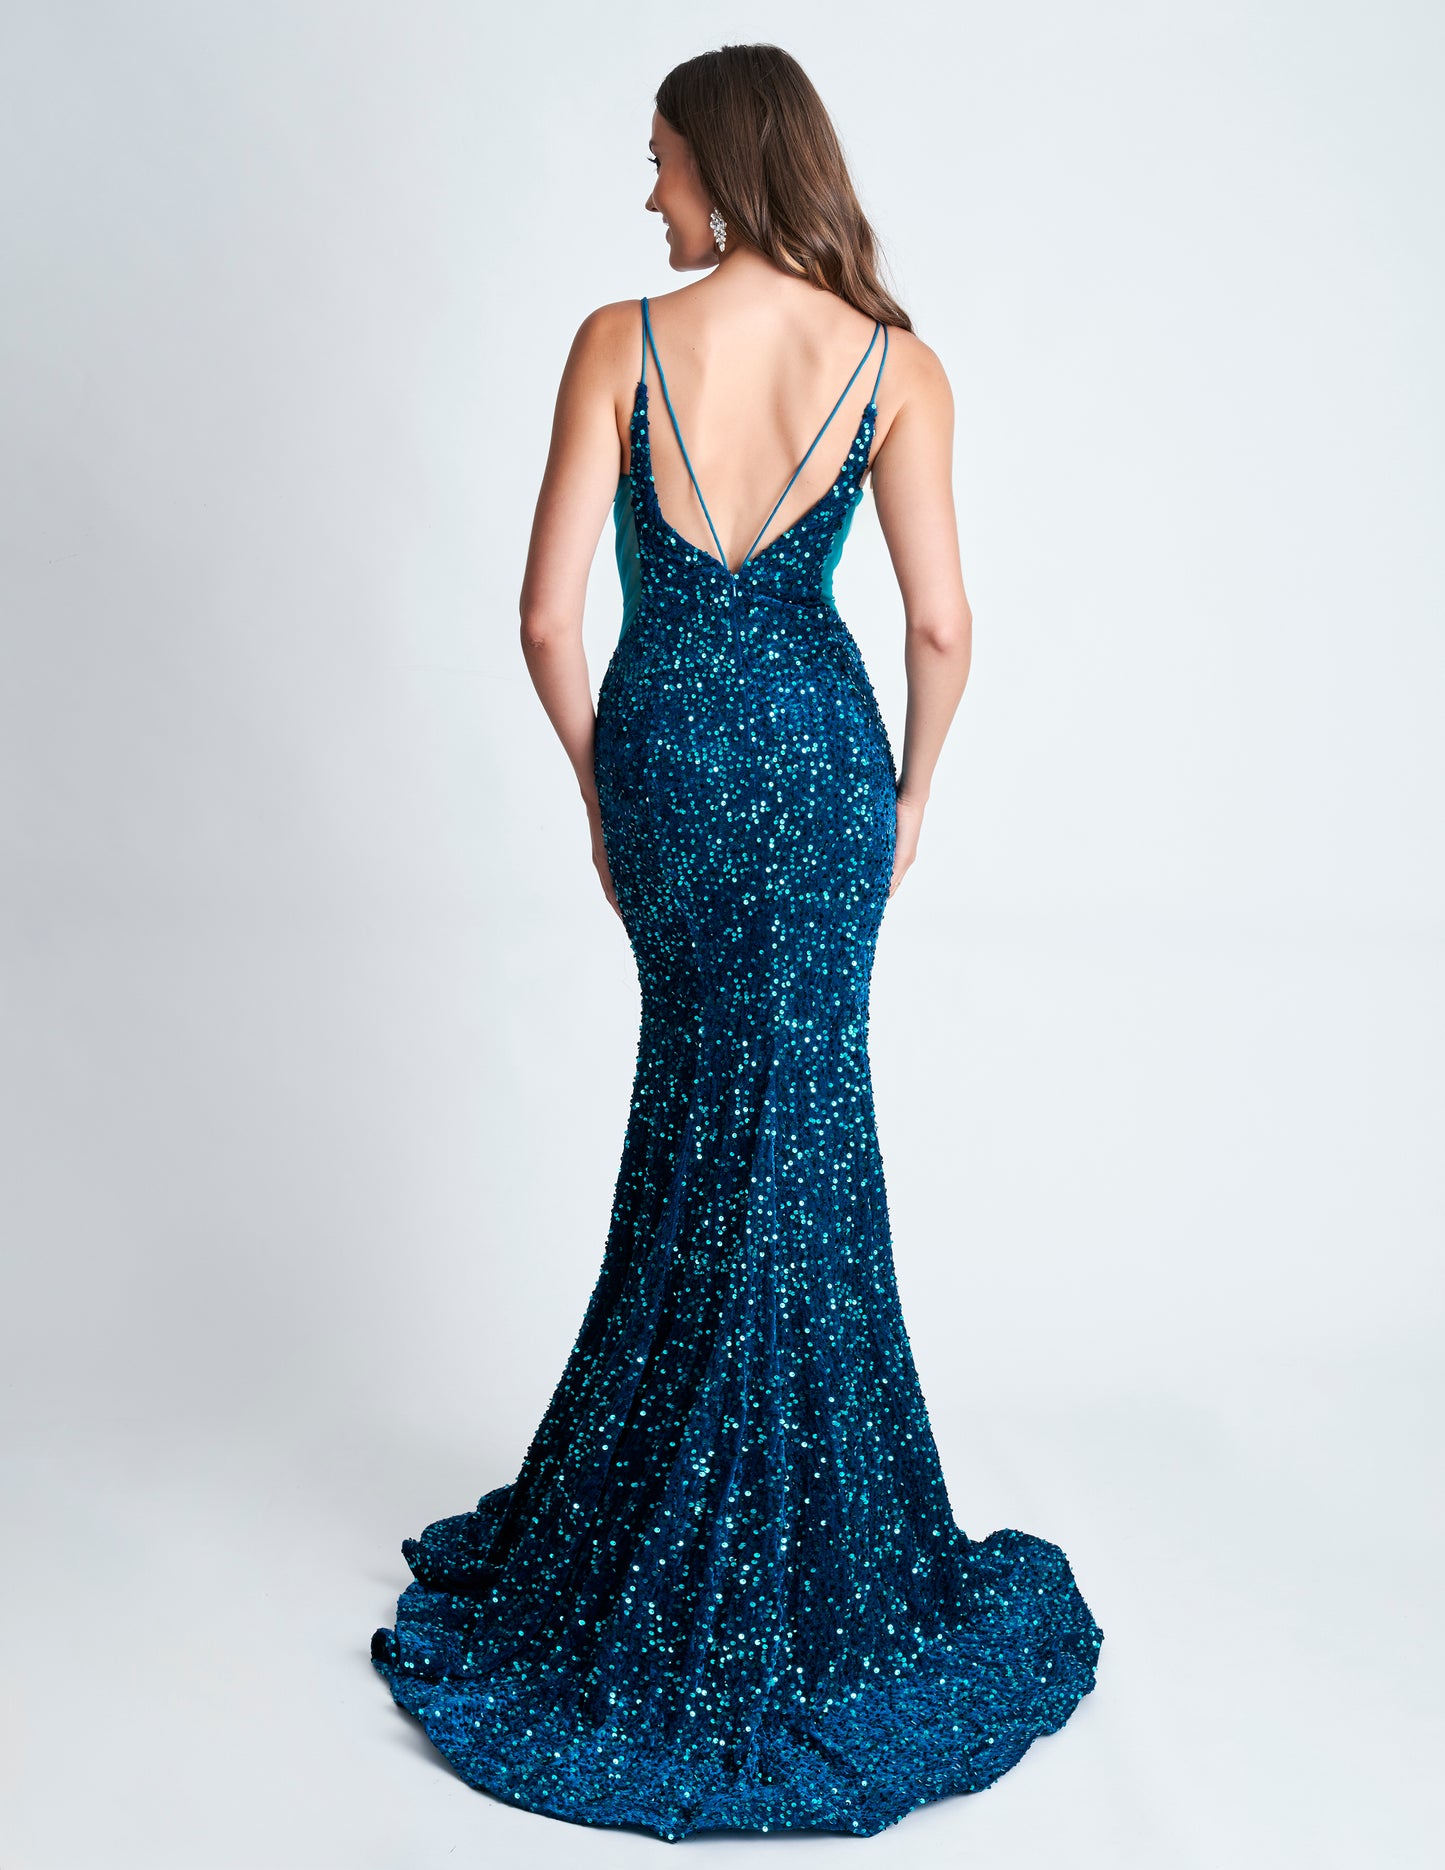 Elevate your style with the Nina Canacci 4420 Velvet Sequin Mermaid Prom Dress. Featuring a striking sheer v-neckline and stunning velvet sequin design, this formal evening gown is sure to make a statement. With its flattering mermaid silhouette, it's the perfect choice for a prom or special occasion.